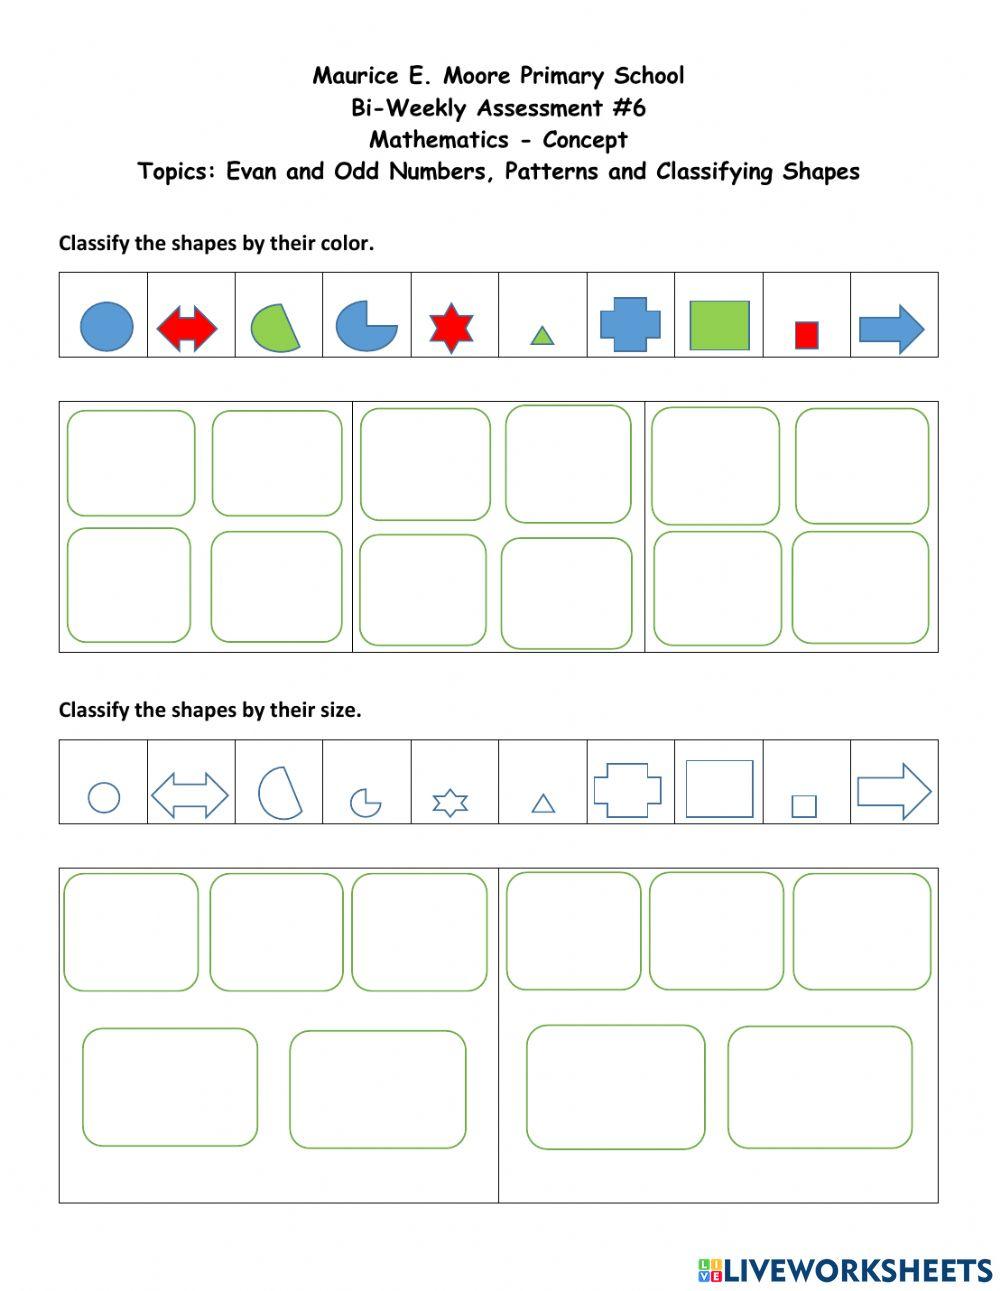 Odd and Even Number-Patterns-Classifying